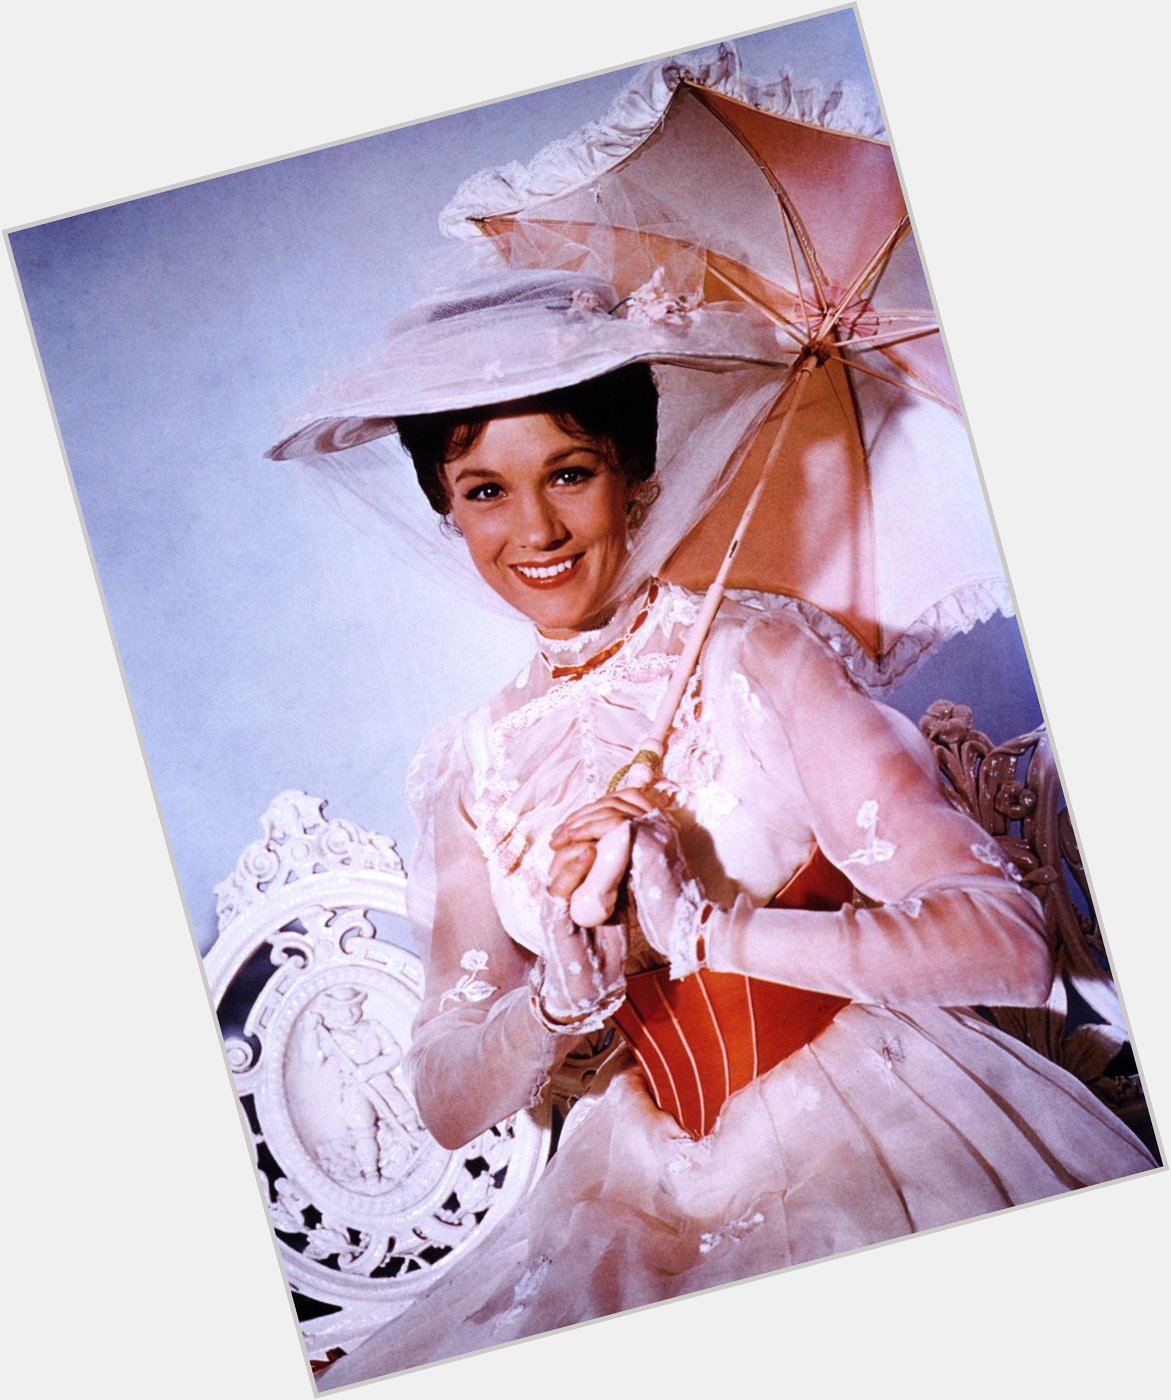 Happy 80th Birthday Julie Andrews! Even if they do remake you will always be the original queen! 